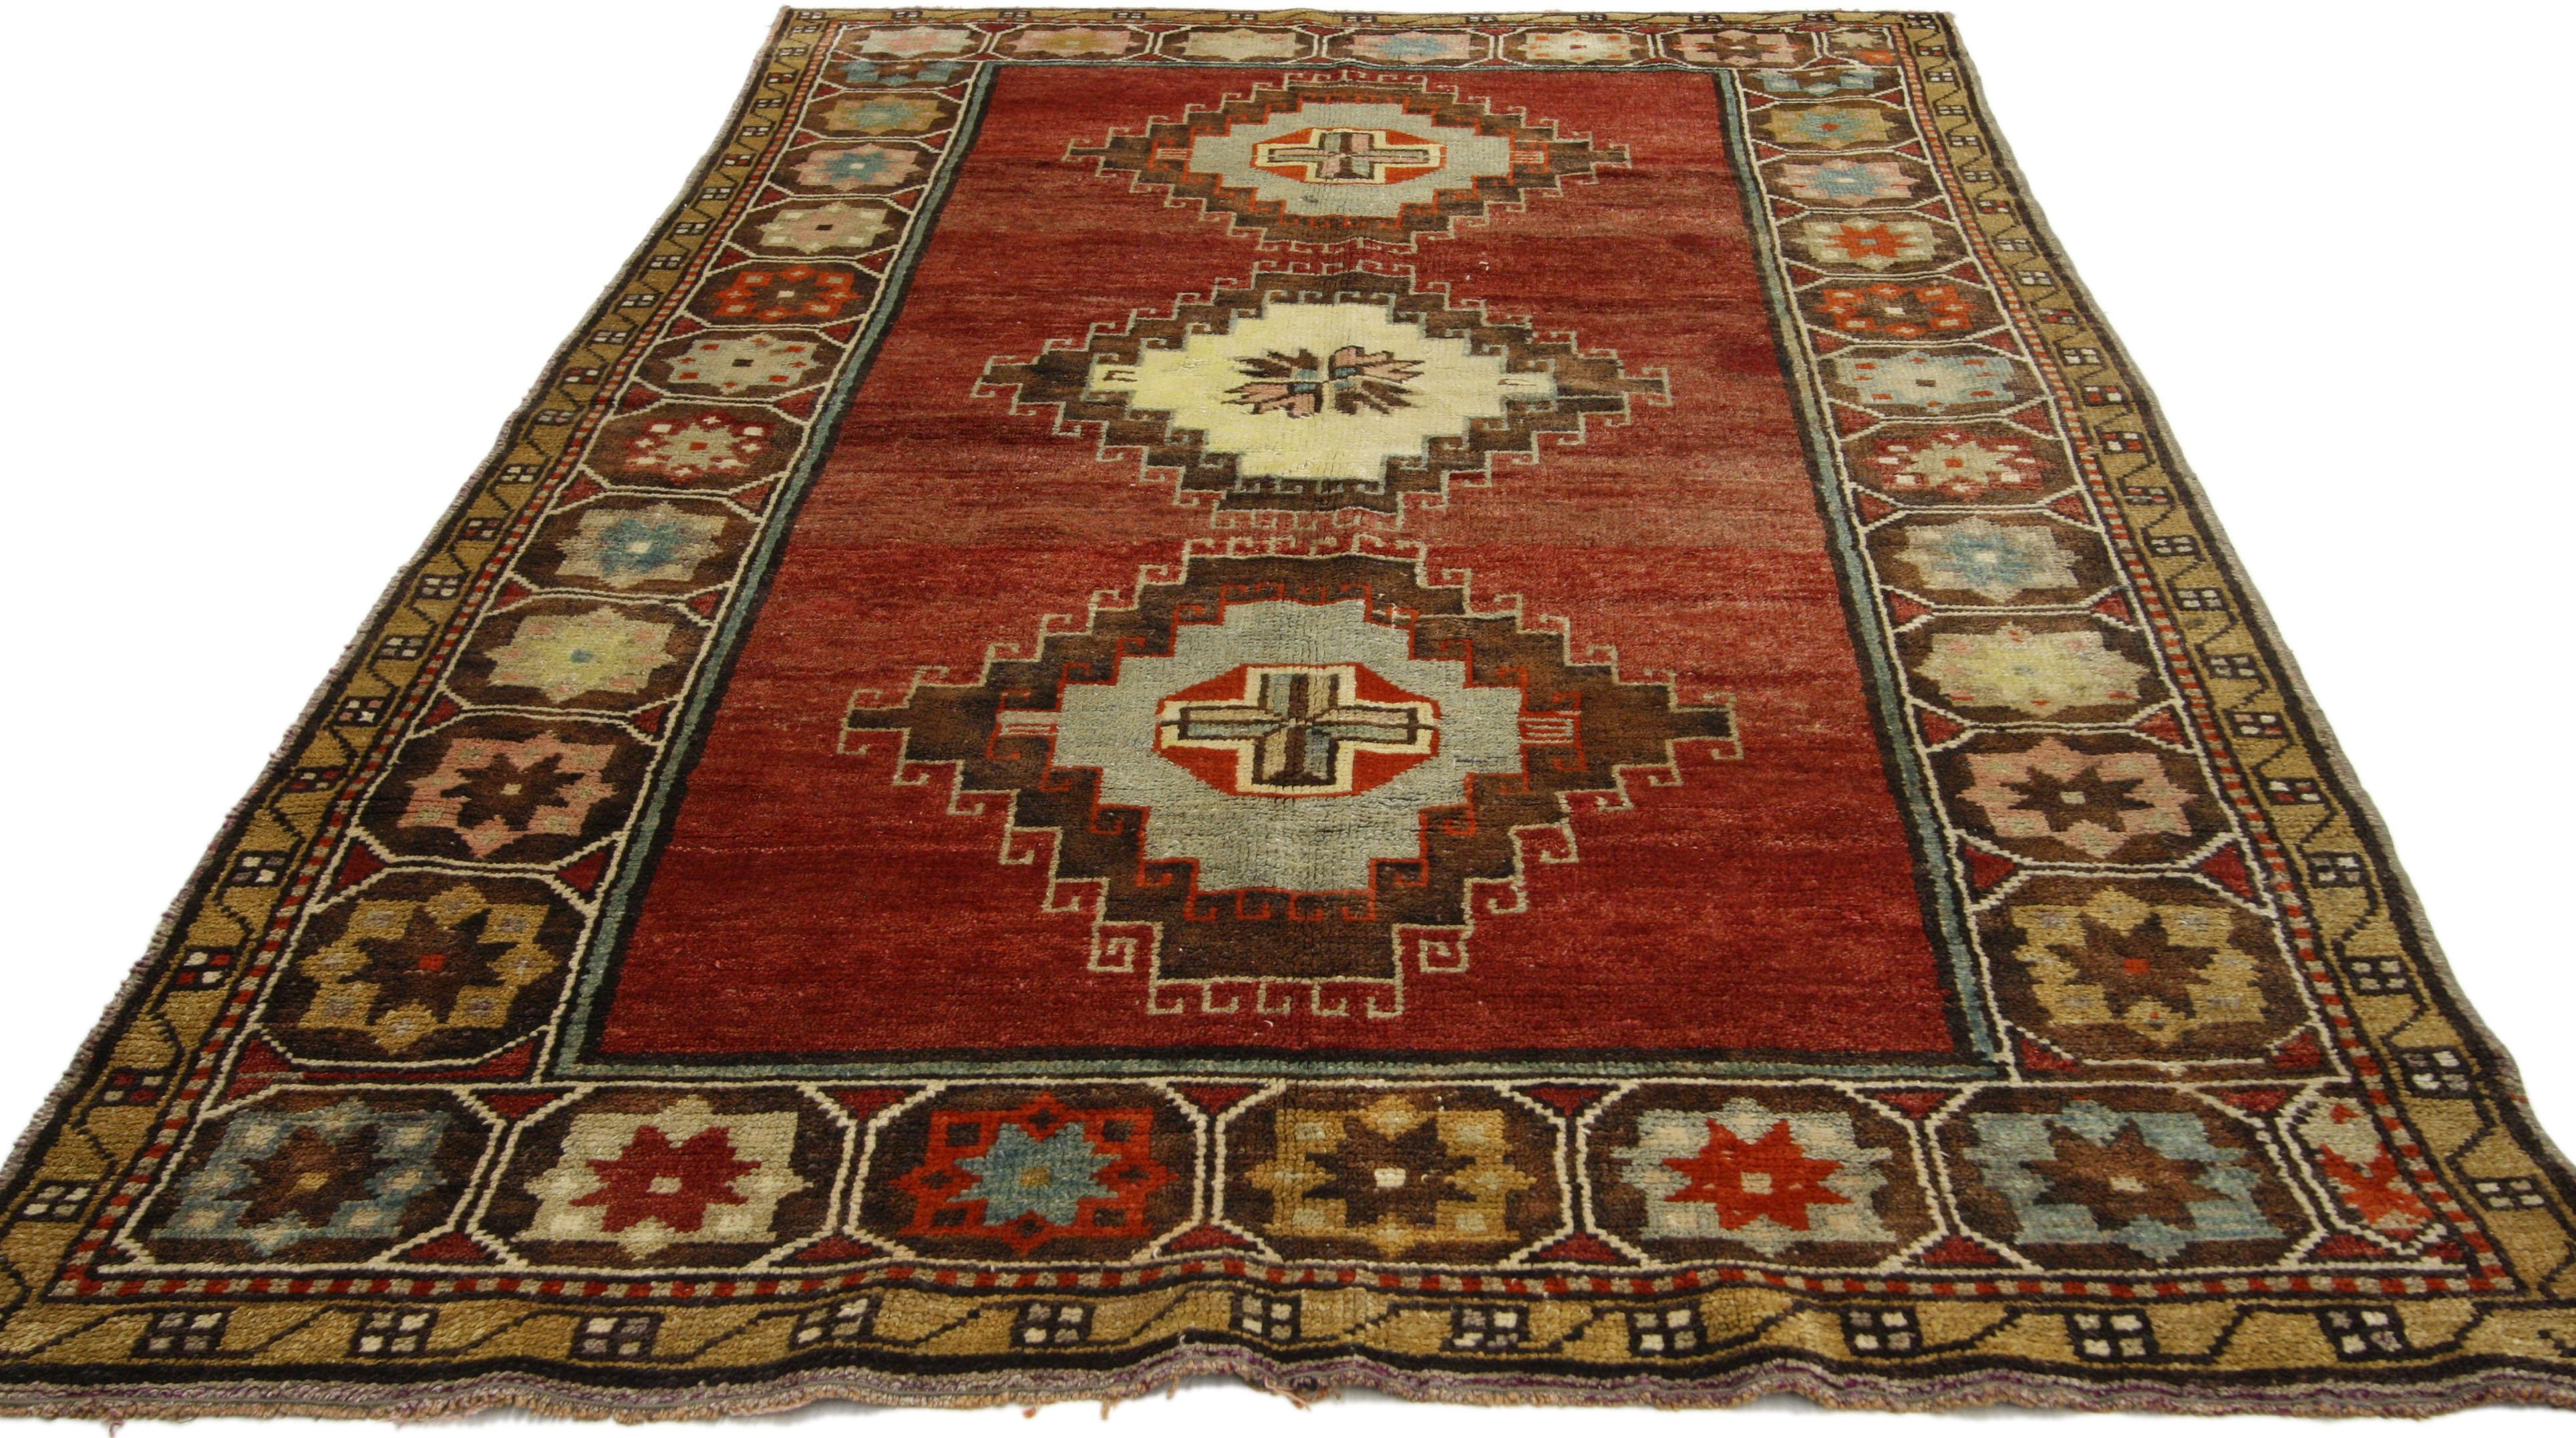 52293, vintage Turkish Oushak rug with modern style, Entry or Foyer rug. This hand-knotted wool vintage Turkish Oushak rug with modern style features three amulet latch hook medallions in an abrashed dark red field. The Oushak accent rug is framed